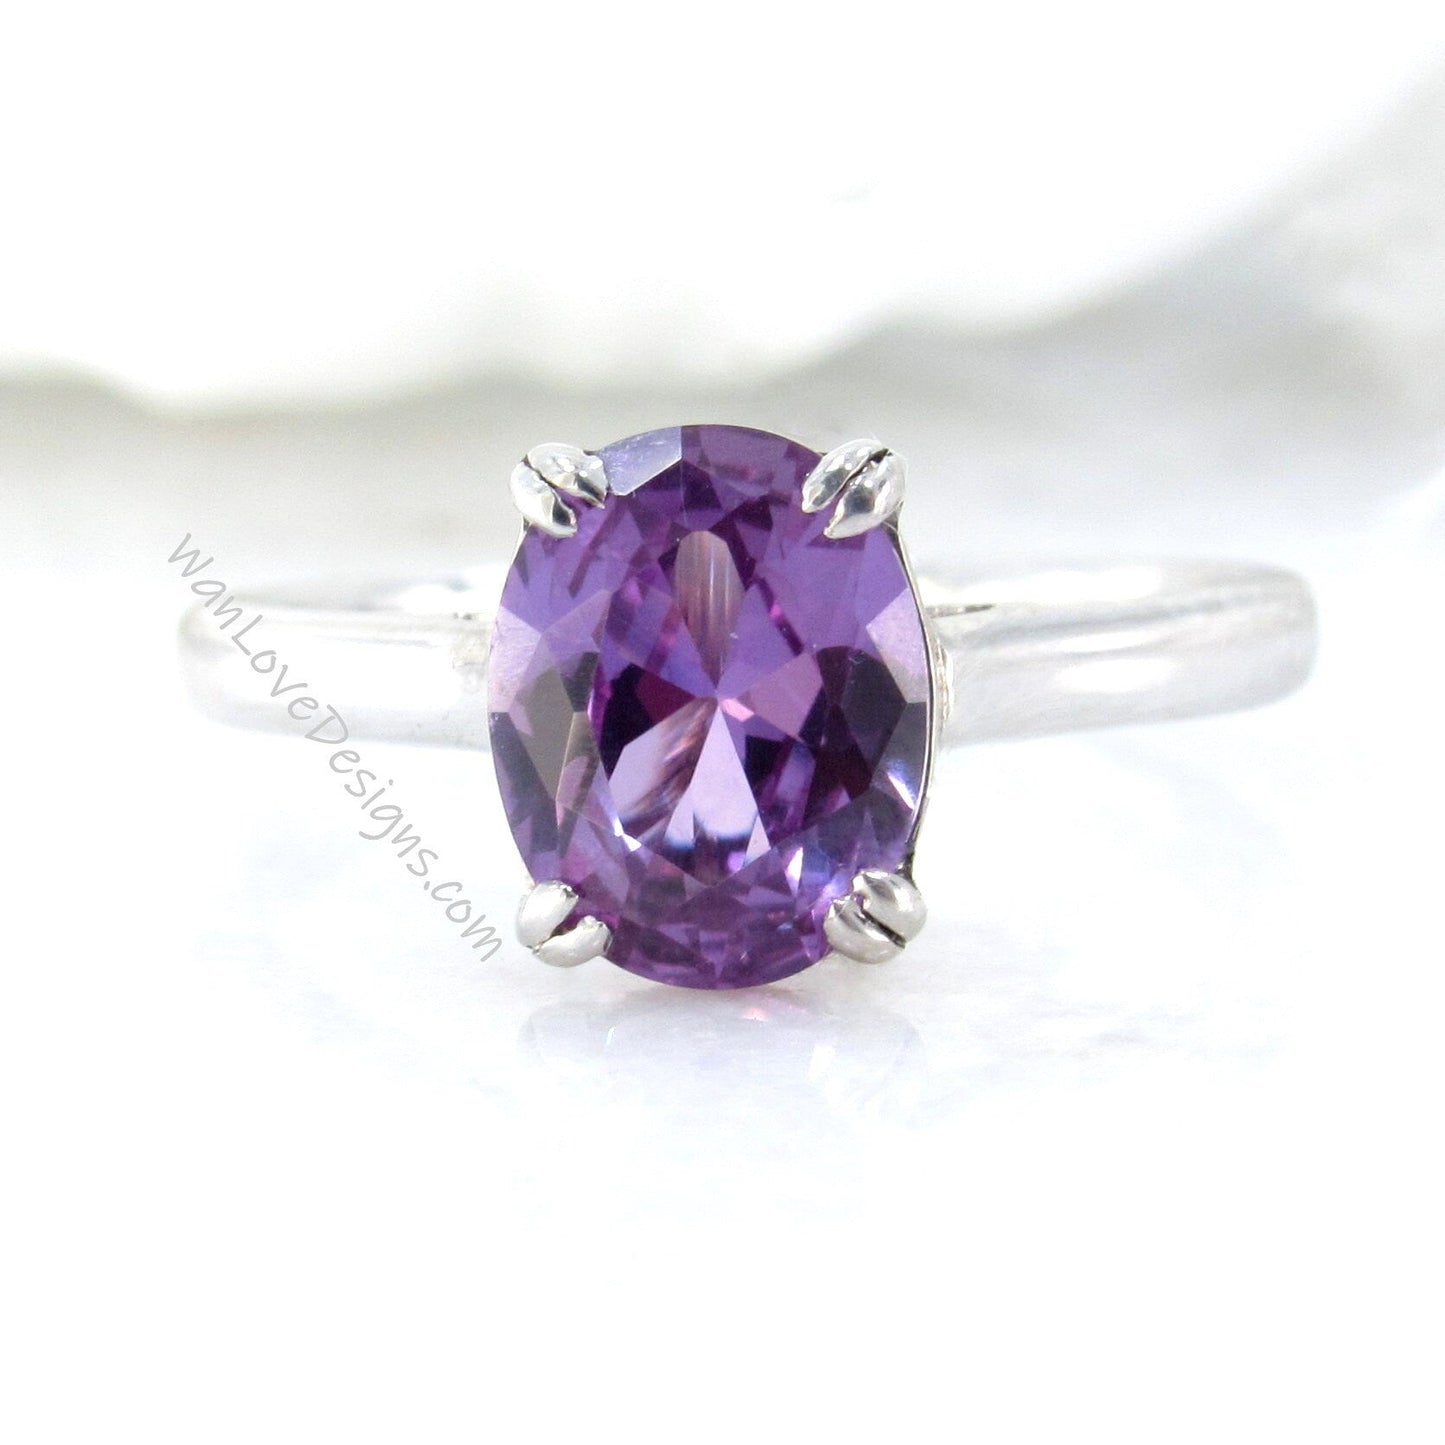 Purple Sapphire Alexandrite Color Solitaire Oval Engagement Ring 3ct 9x7mm Wedding Anniversary Gift promise ring gift for her-Ready to Ship Wan Love Designs